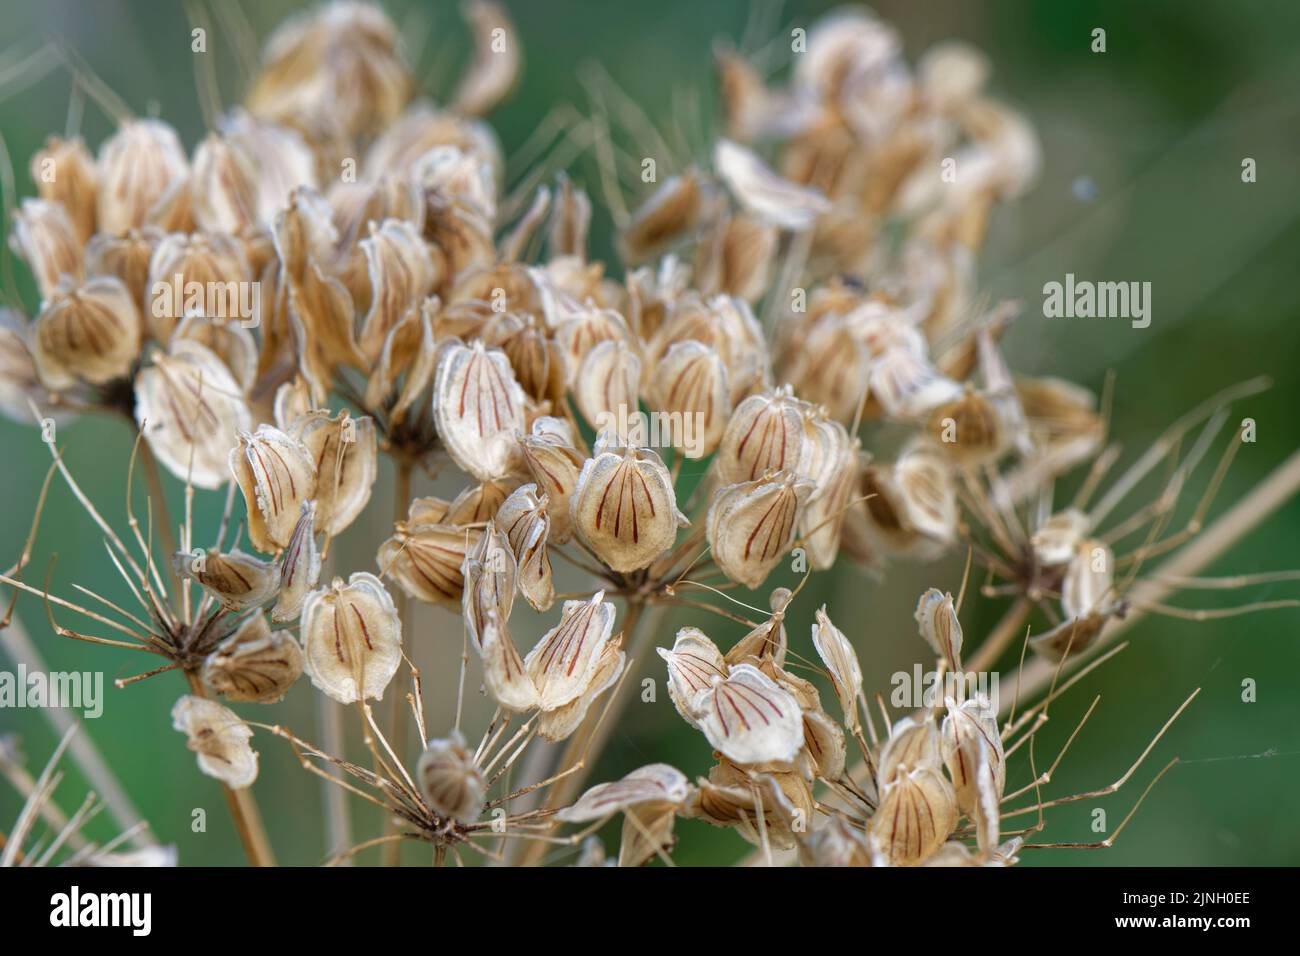 Common hogweed (Heracleum sphondylium) seedhead with winged, striped, edible seeds, Somerset, UK, August. Stock Photo